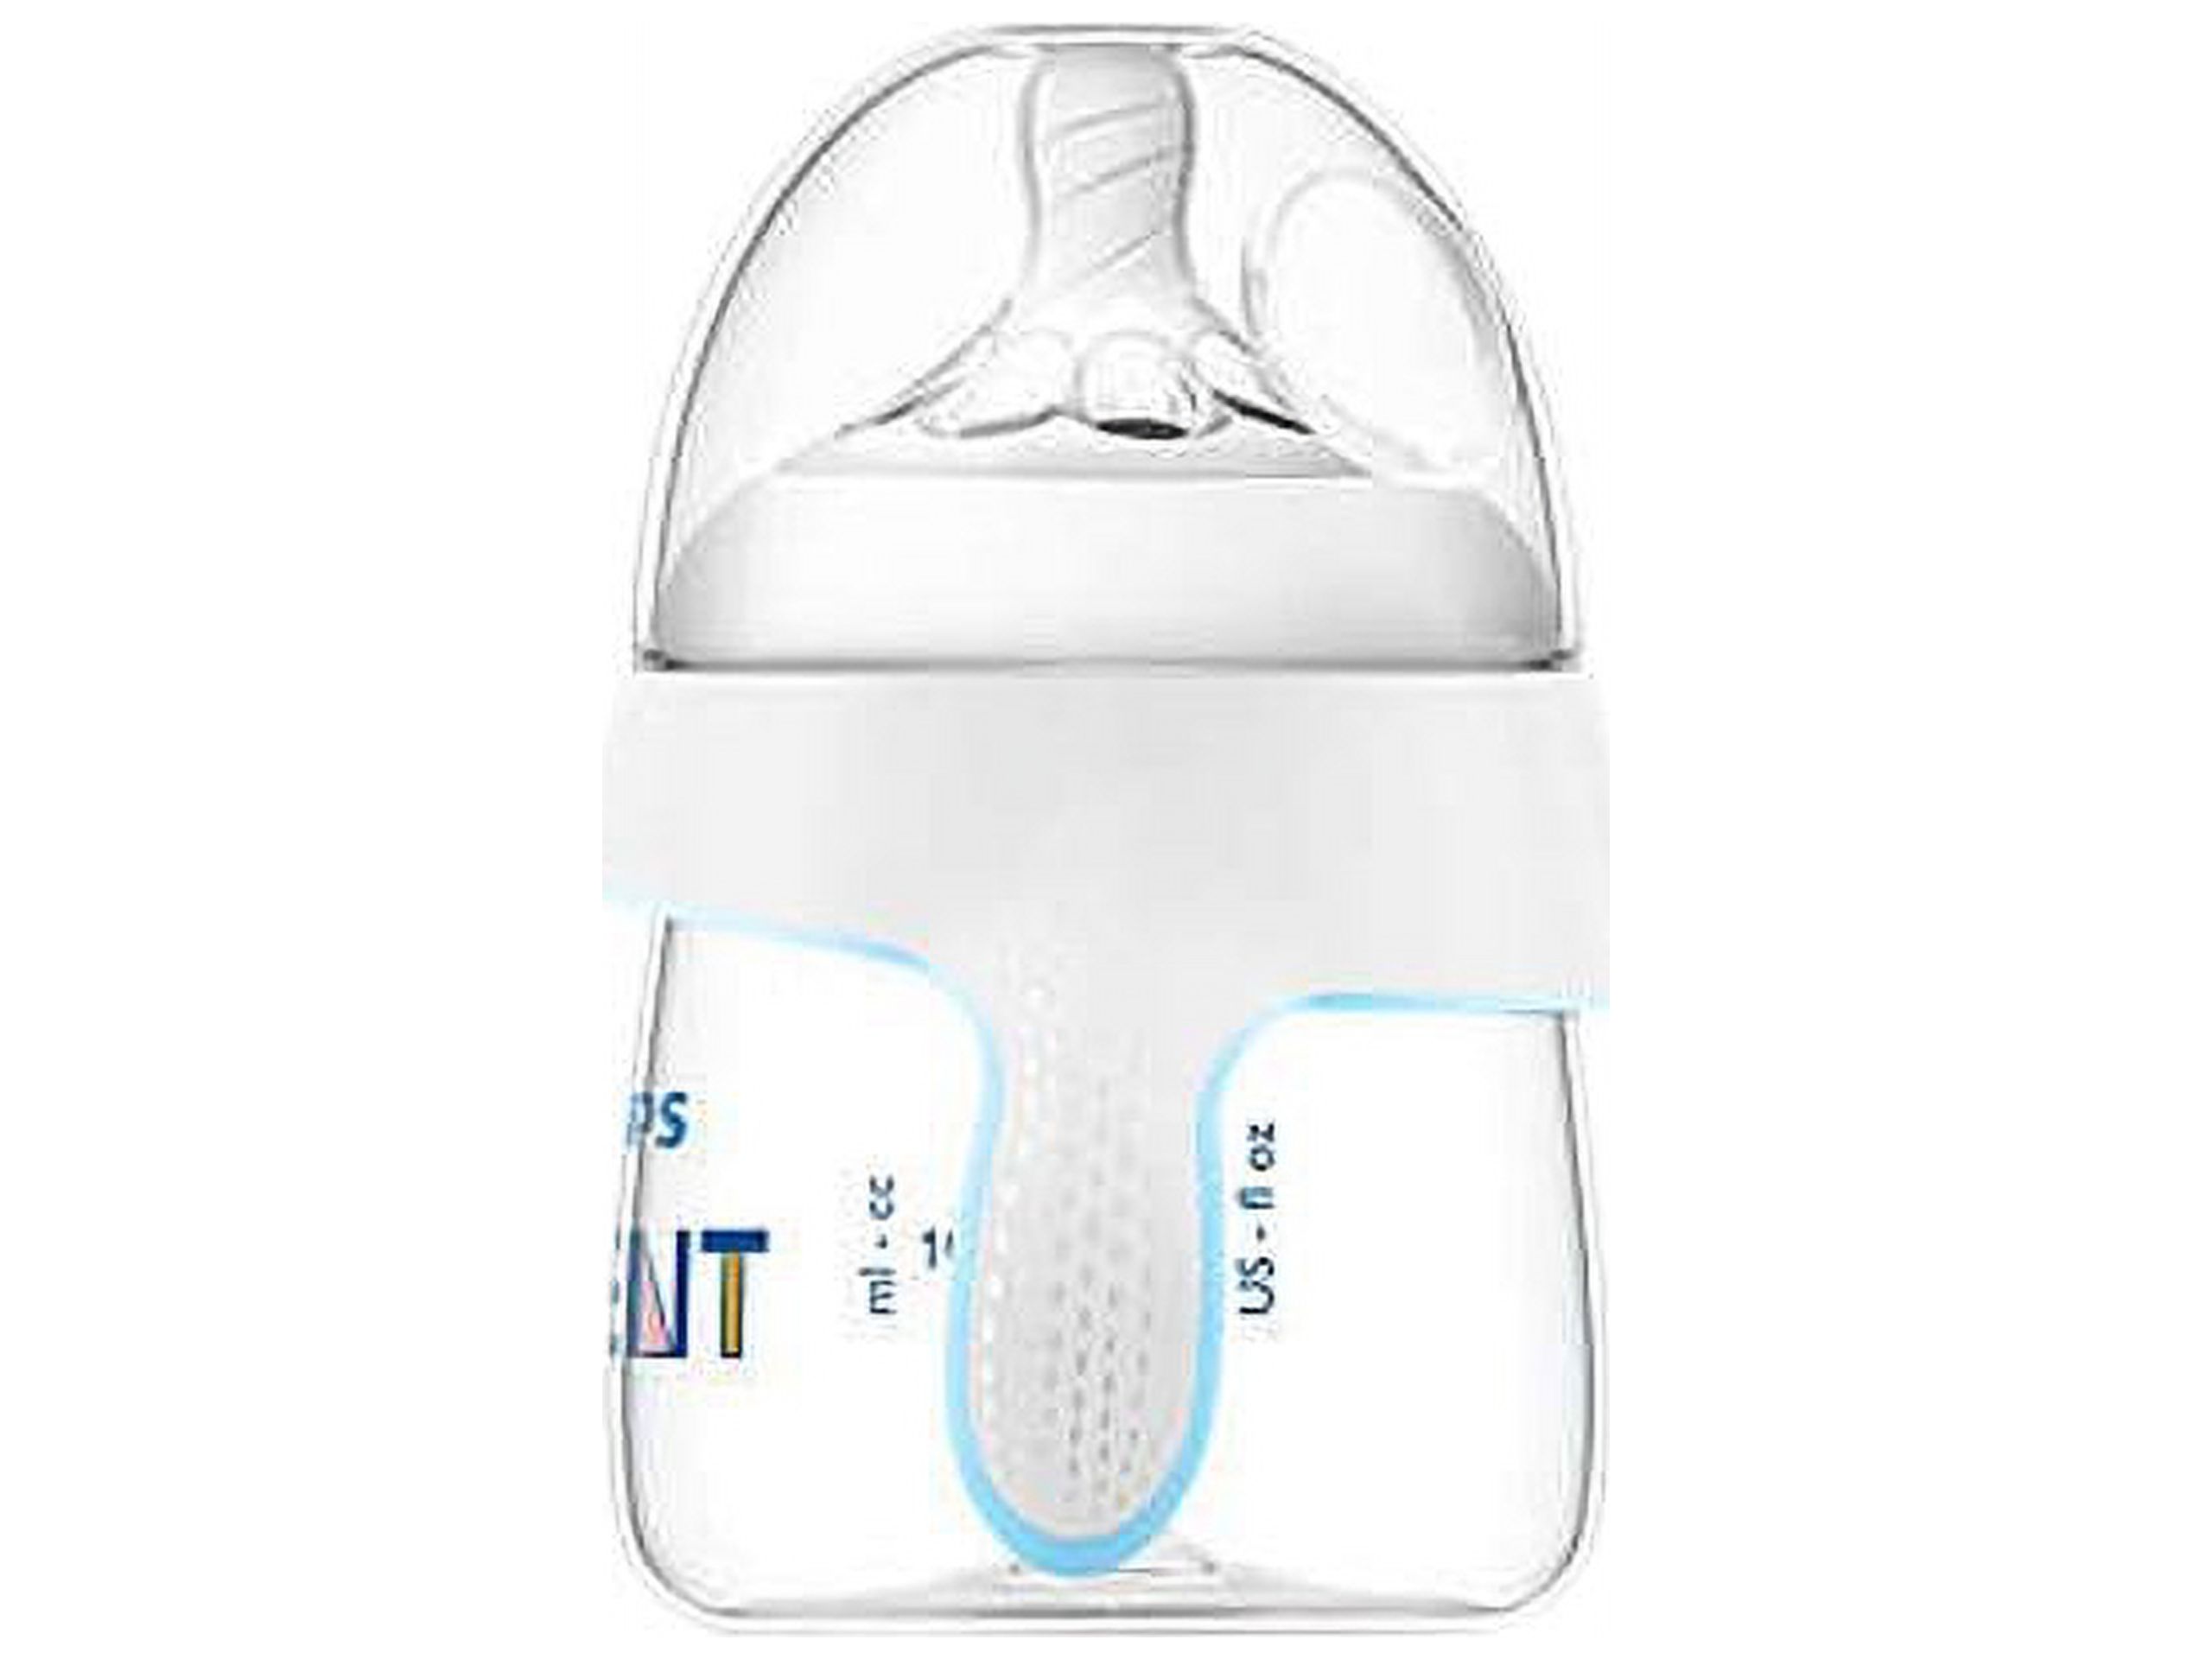 Philips Avent My Natural Trainer Sippy Cup, Clear, 5 oz., 1pk, SCF262/03 - image 1 of 6